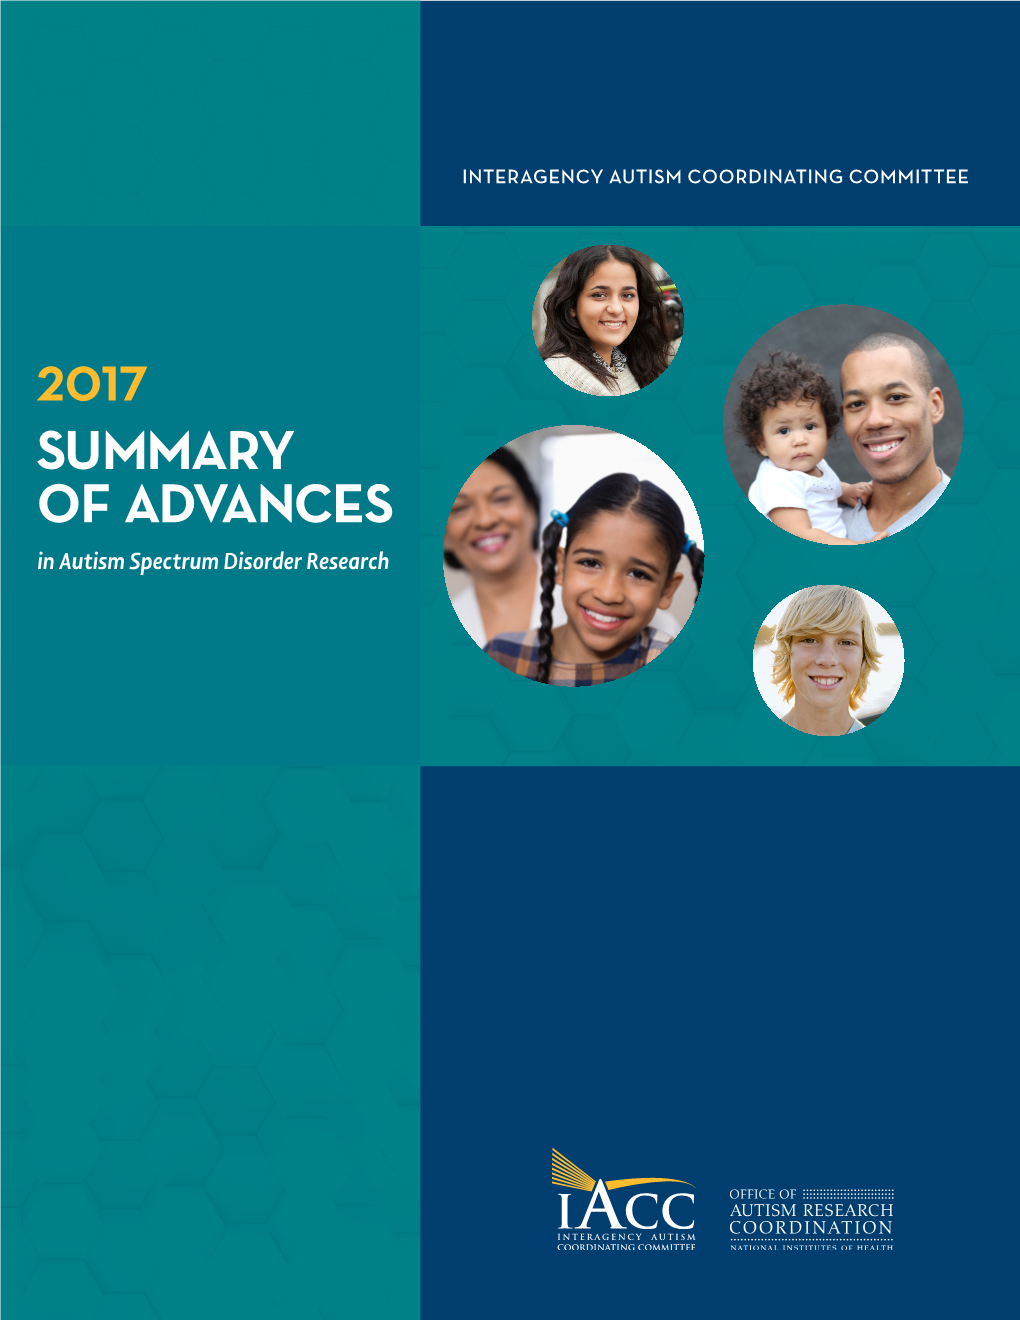 2017 SUMMARY of ADVANCES in Autism Spectrum Disorder Research INTERAGENCY AUTISM COORDINATING COMMITTEE